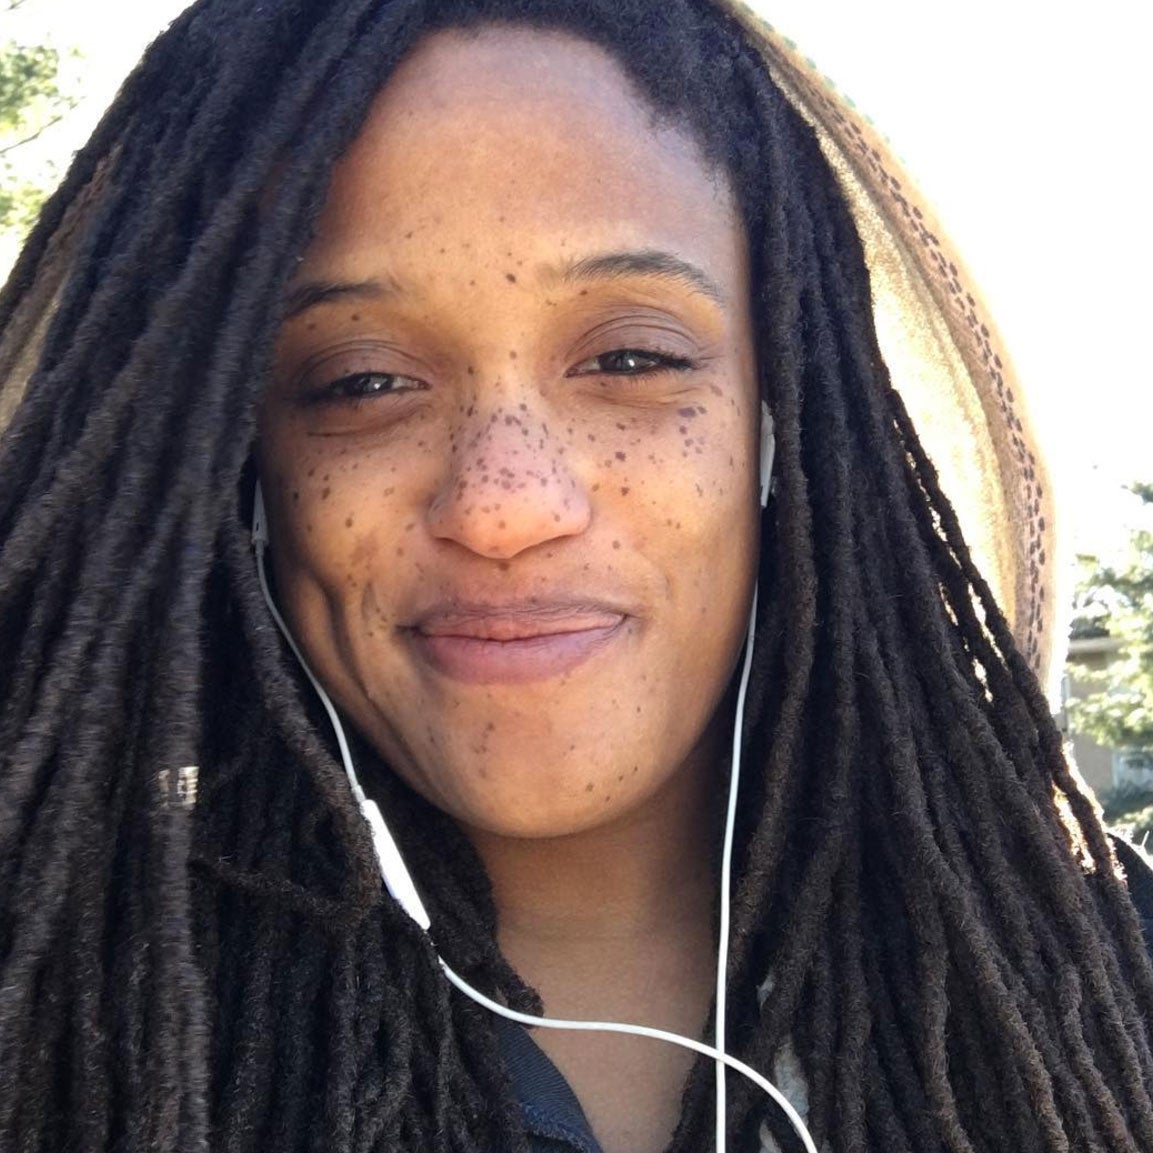 26 Beautiful Black Women Flaunting Their Freckles
